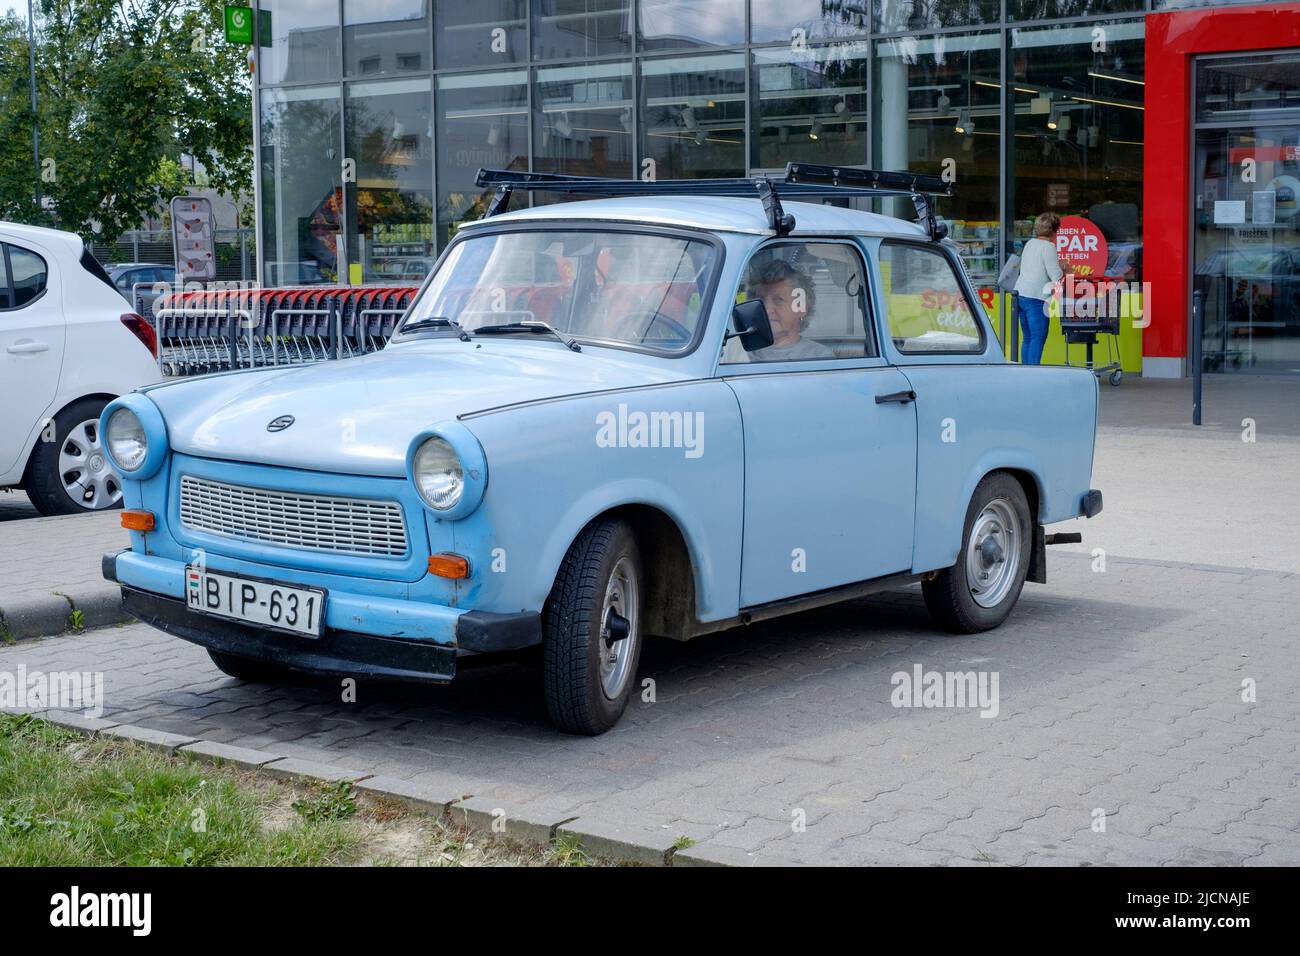 elderly woman sitting in the driving seat of her old trabant car at supermarket carpark lenti zala county hungary Stock Photo